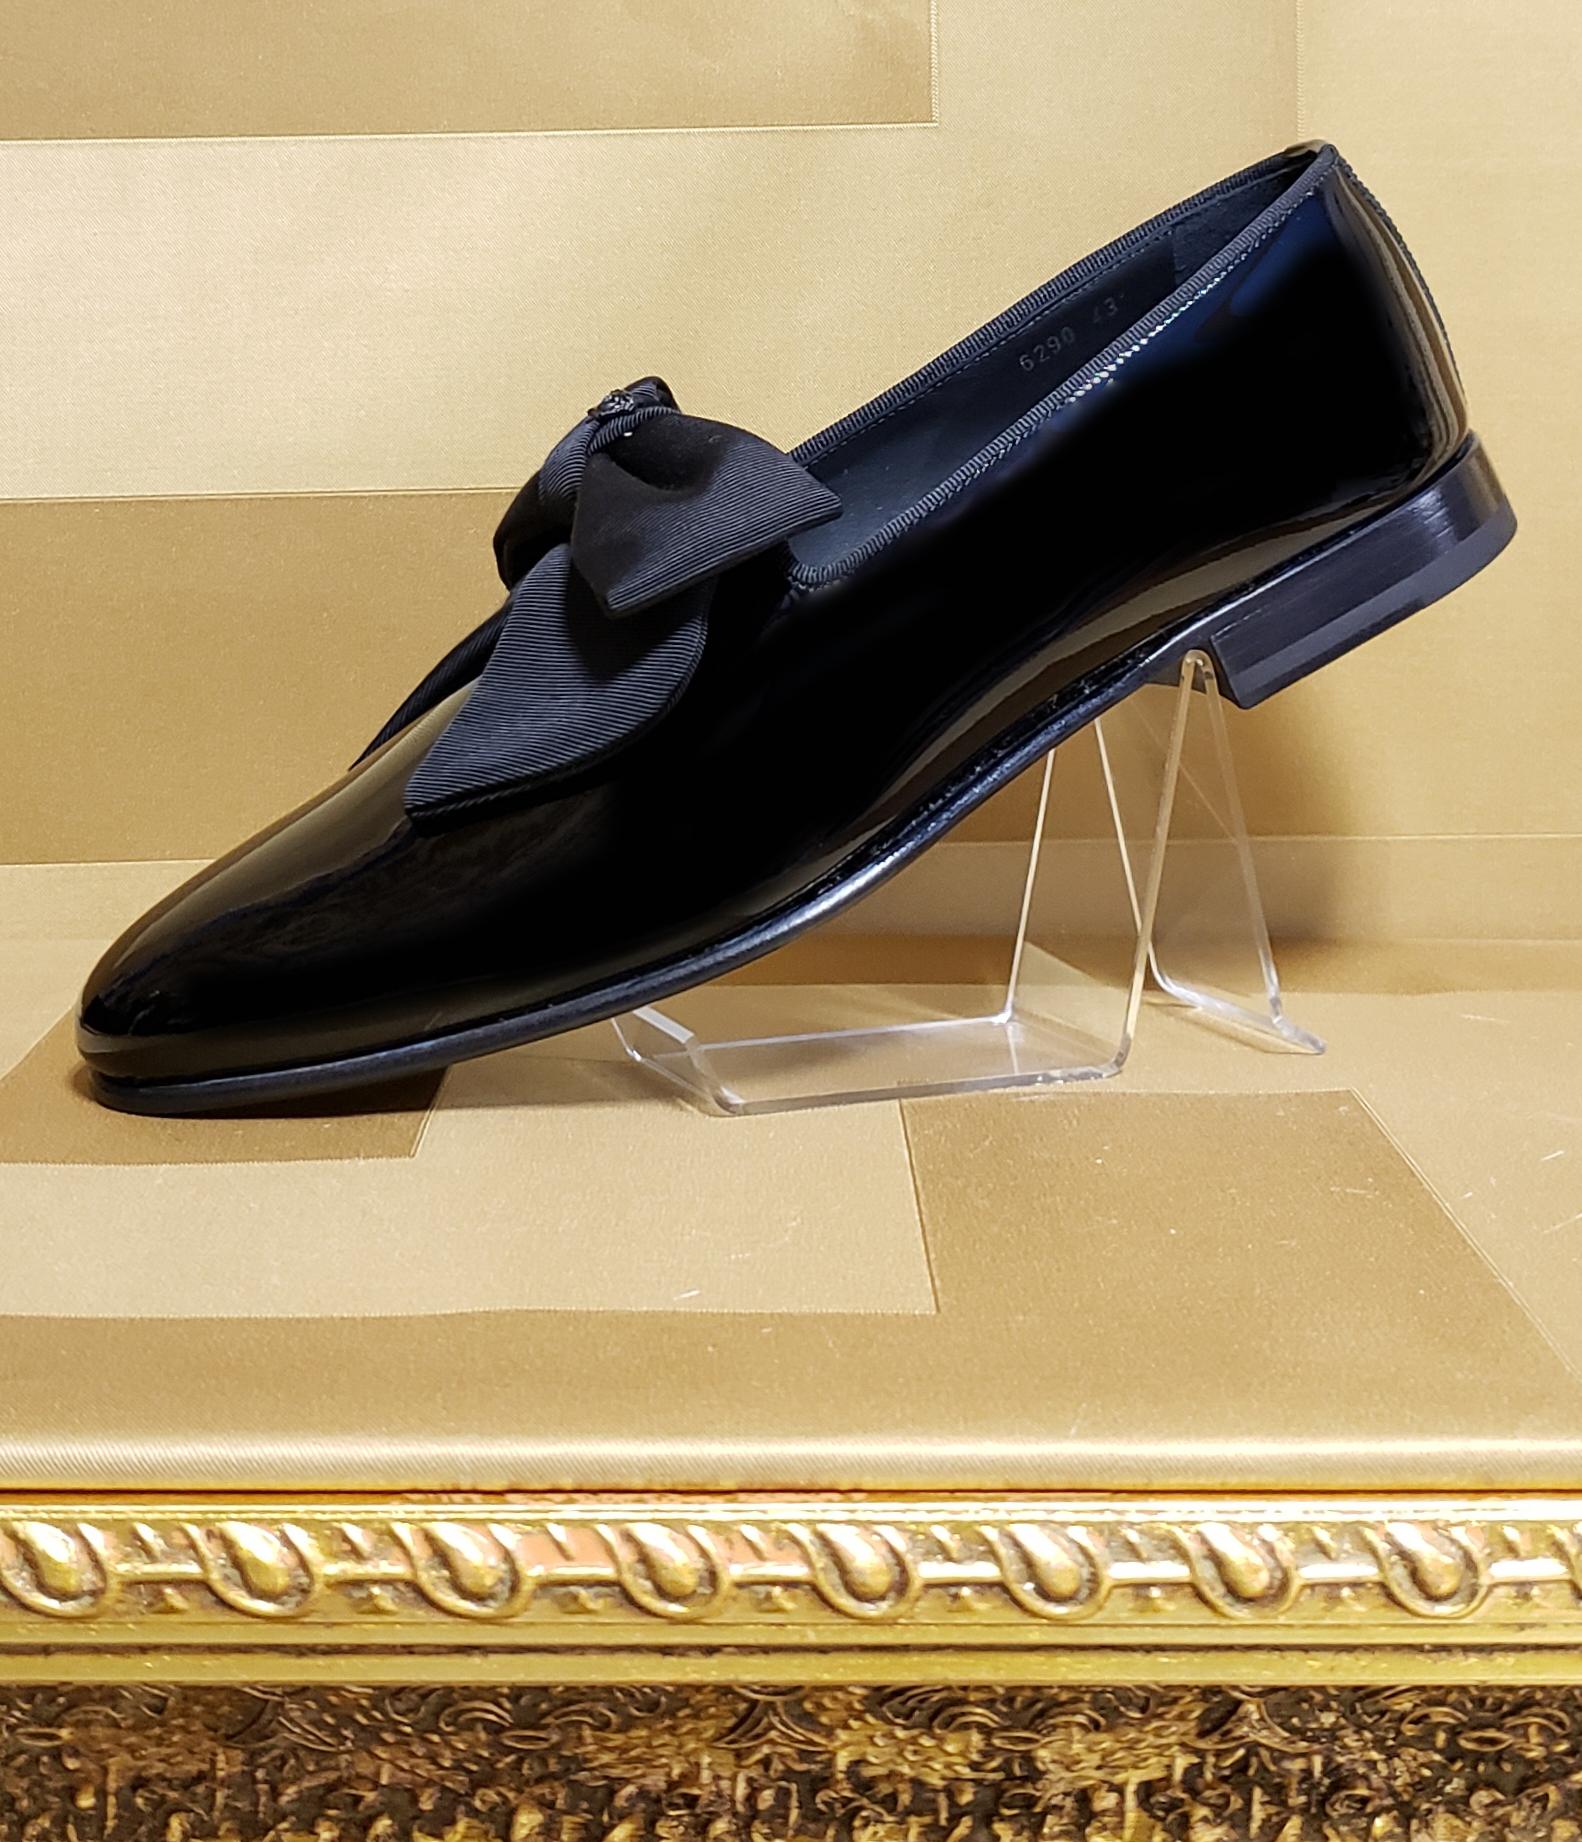 Men's VERSACE BLACK PATENT LEATHER LOAFER Shoes 43 - 10